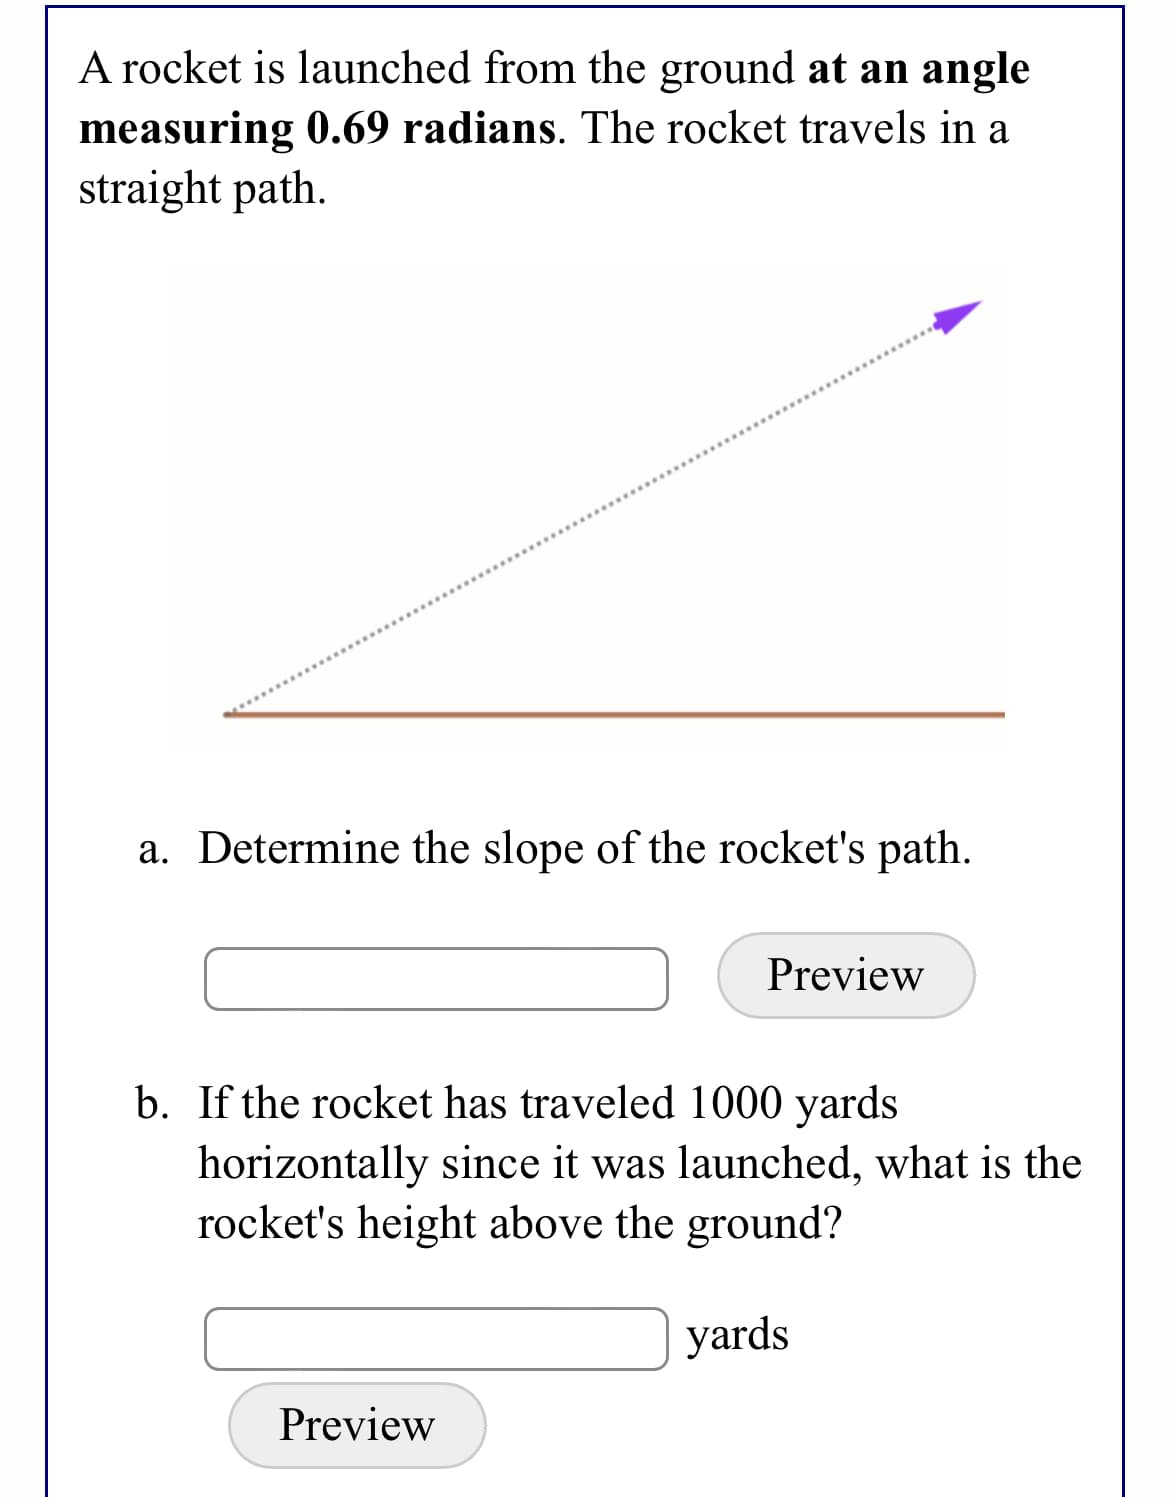 A rocket is launched from the ground at an angle
measuring 0.69 radians. The rocket travels in a
straight path.
a. Determine the slope of the rocket's path.
Preview
b. If the rocket has traveled 1000 yards
horizontally since it was launched, what is the
rocket's height above the ground?
yards
Preview
